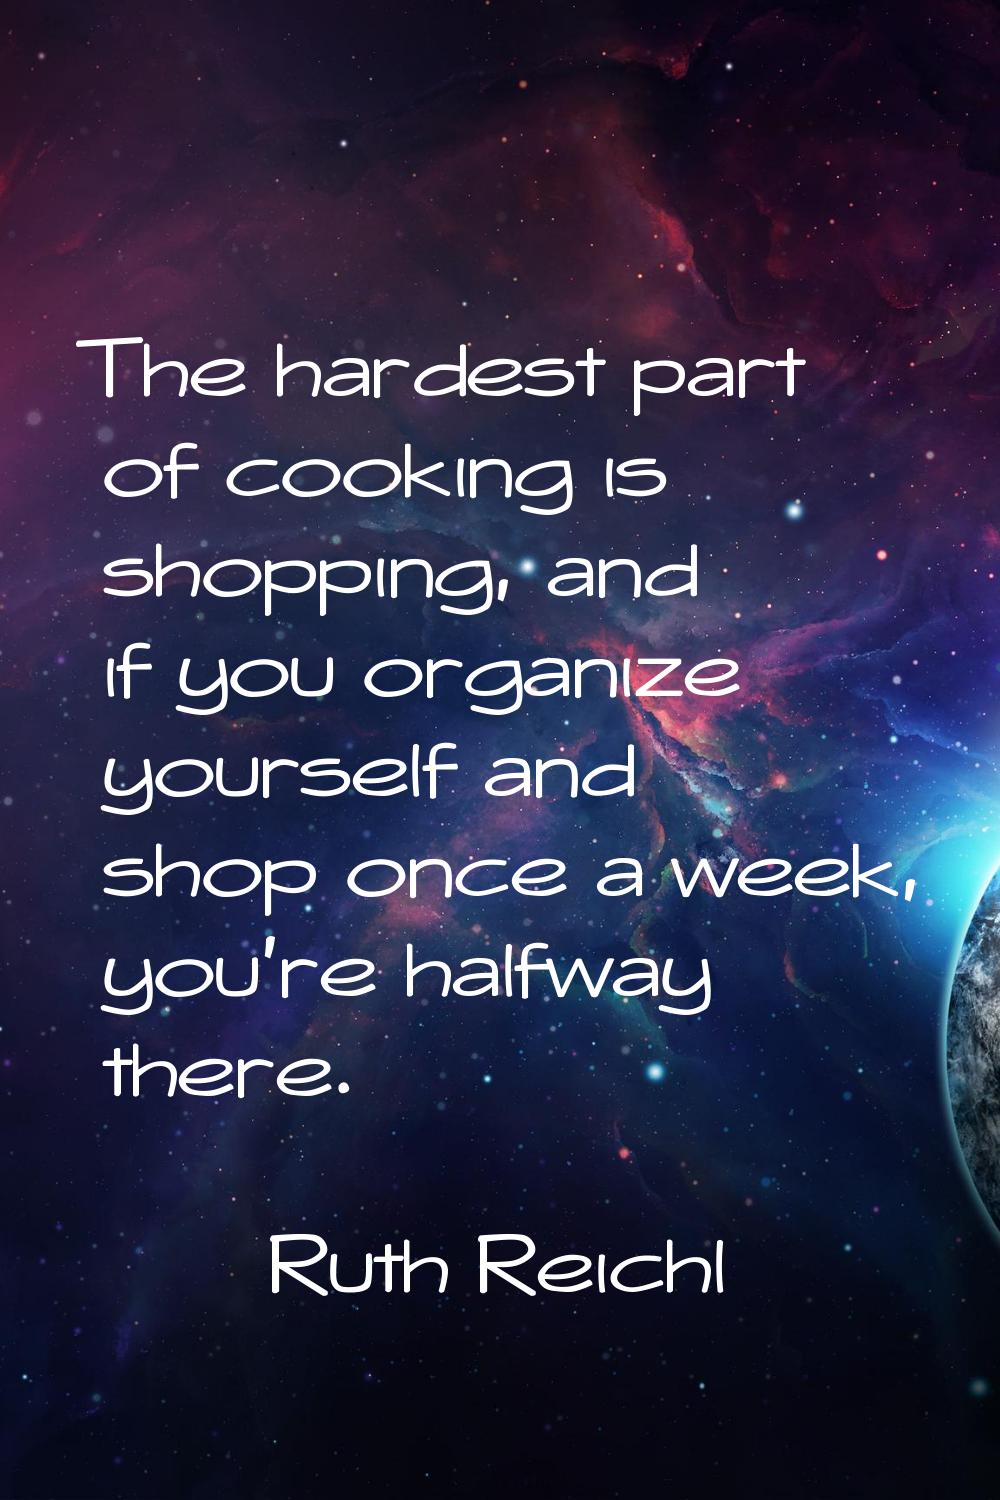 The hardest part of cooking is shopping, and if you organize yourself and shop once a week, you're 